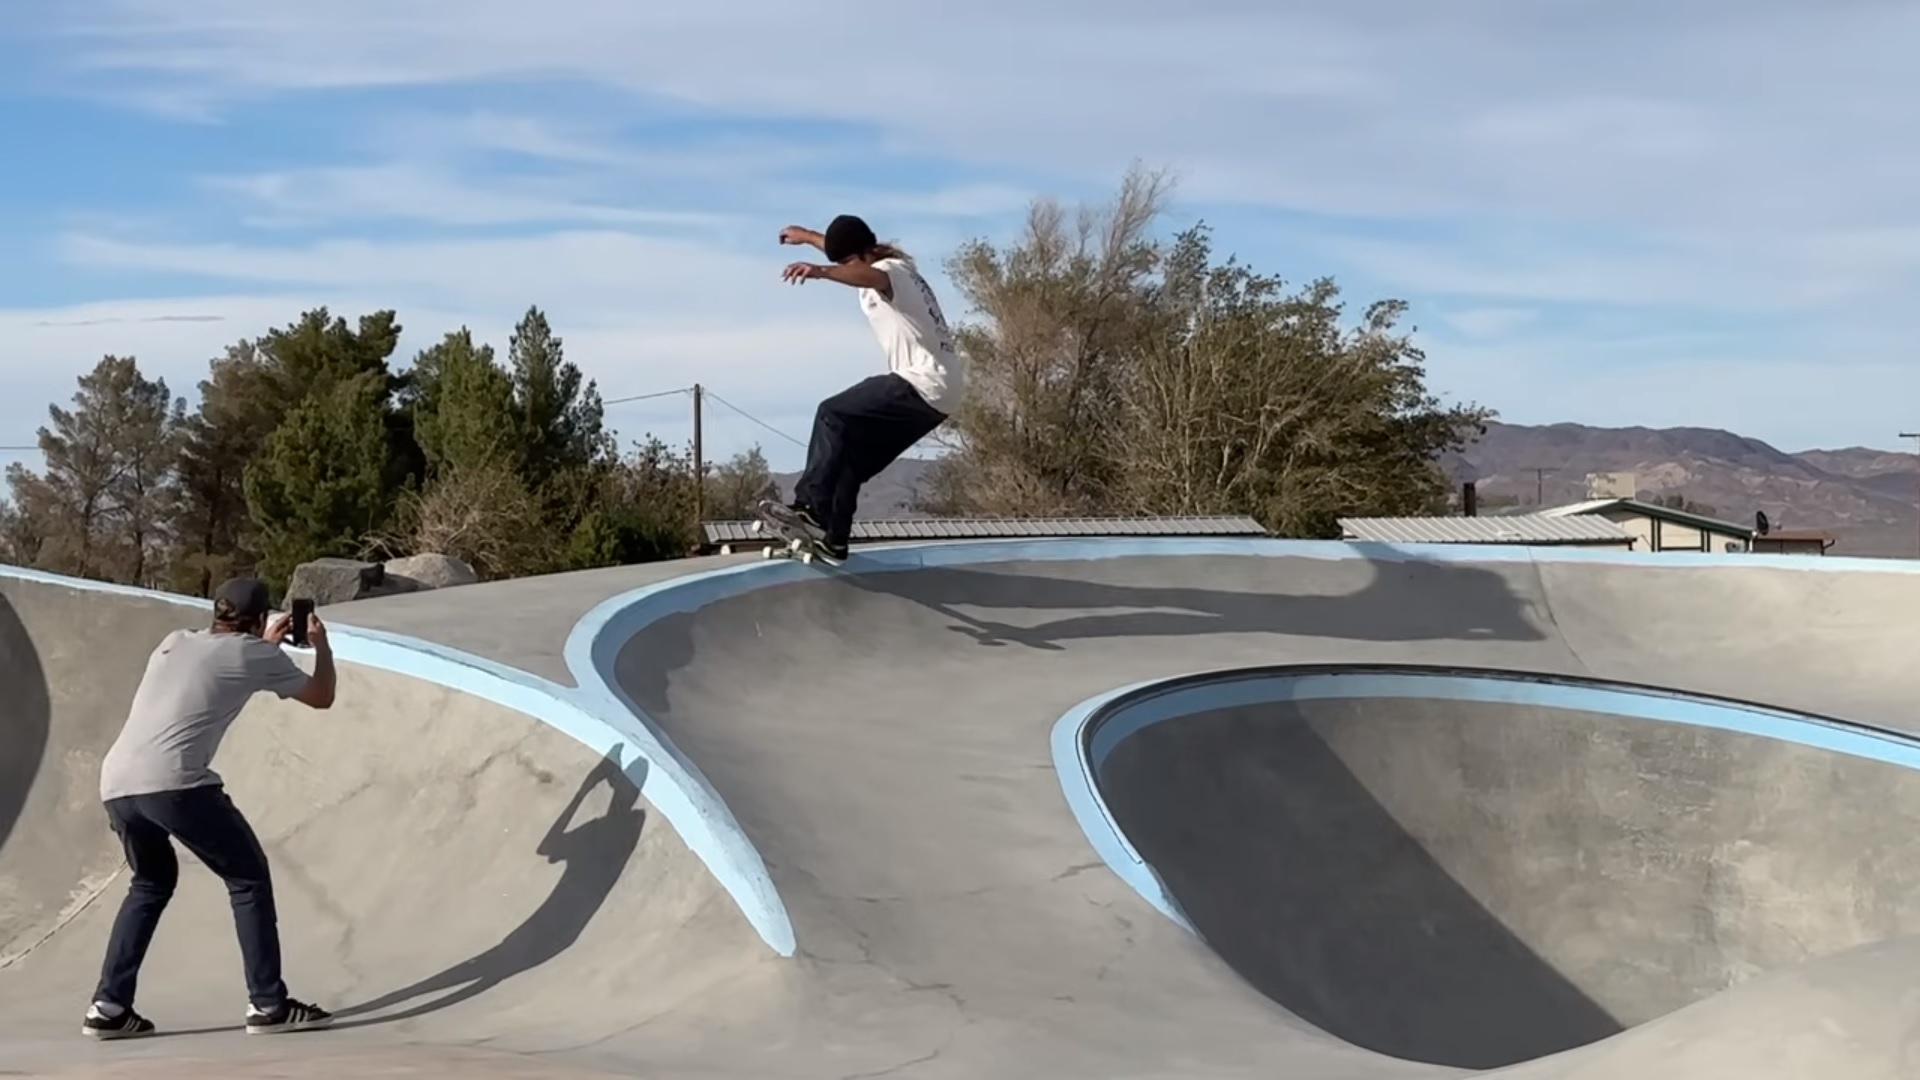 KEEN RAMPS – I bought an Entire SKATEPARK in the middle of the Desert